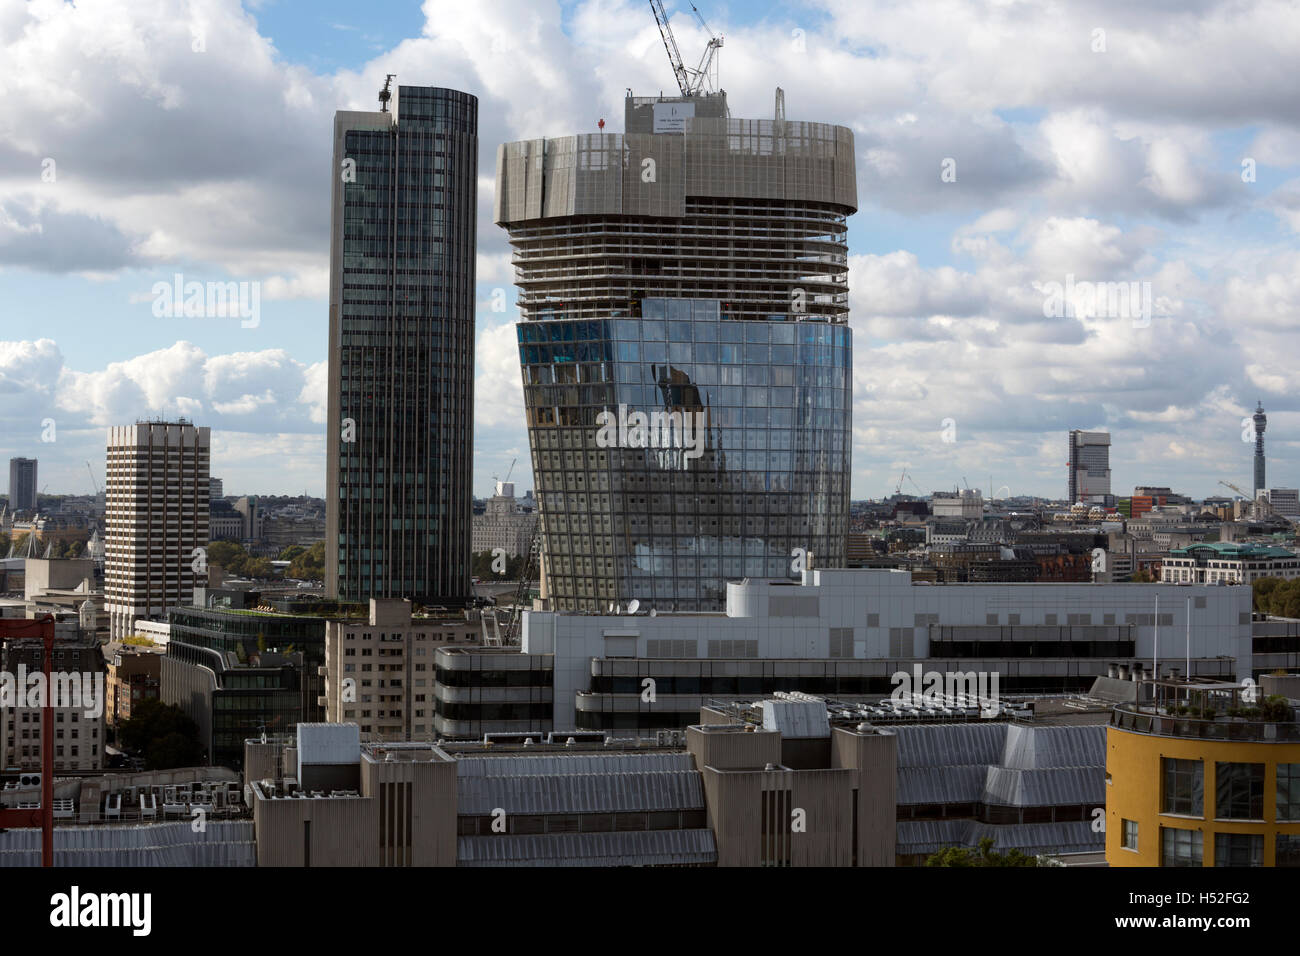 A view towards One Blackfriars building from the Tate Modern Switch House viewing terrace, London, UK Stock Photo